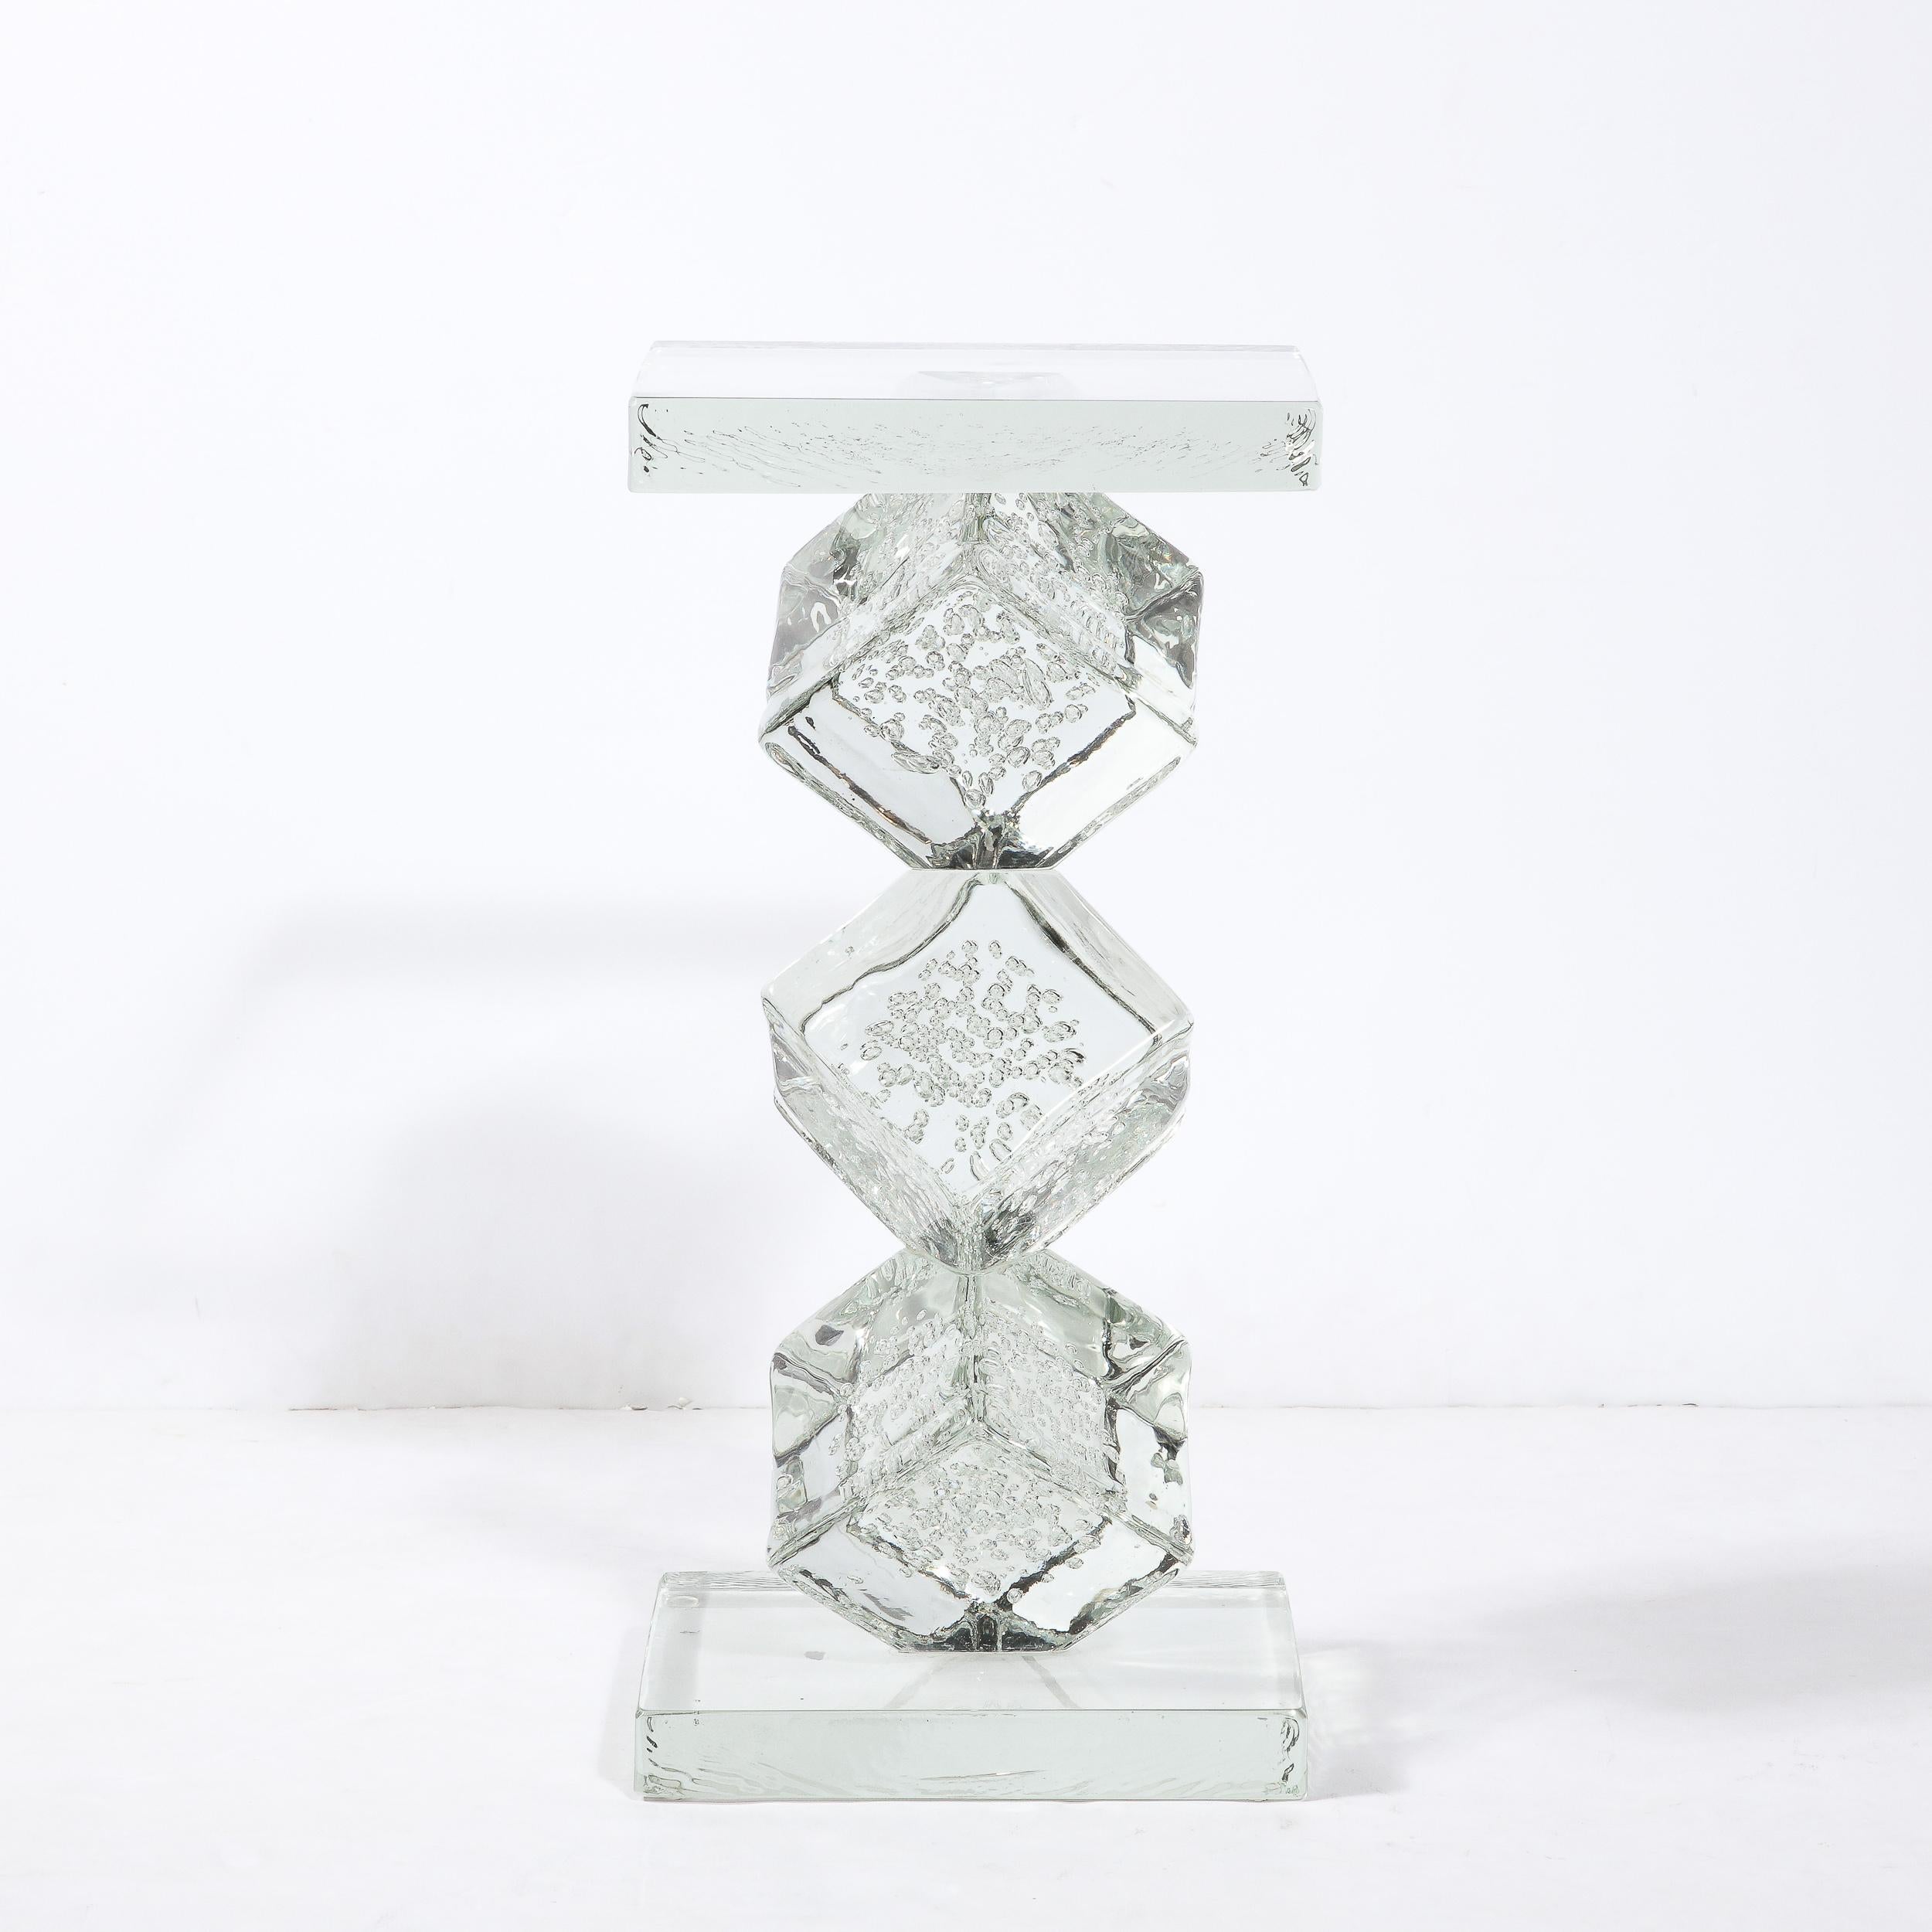 This refined and dynamic side/end table was realized in Murano, Italy- the island off the coast of Venice, renowned for centuries for its superlative glass production. It features a rectangular base and top with three stacked volumetric cubes